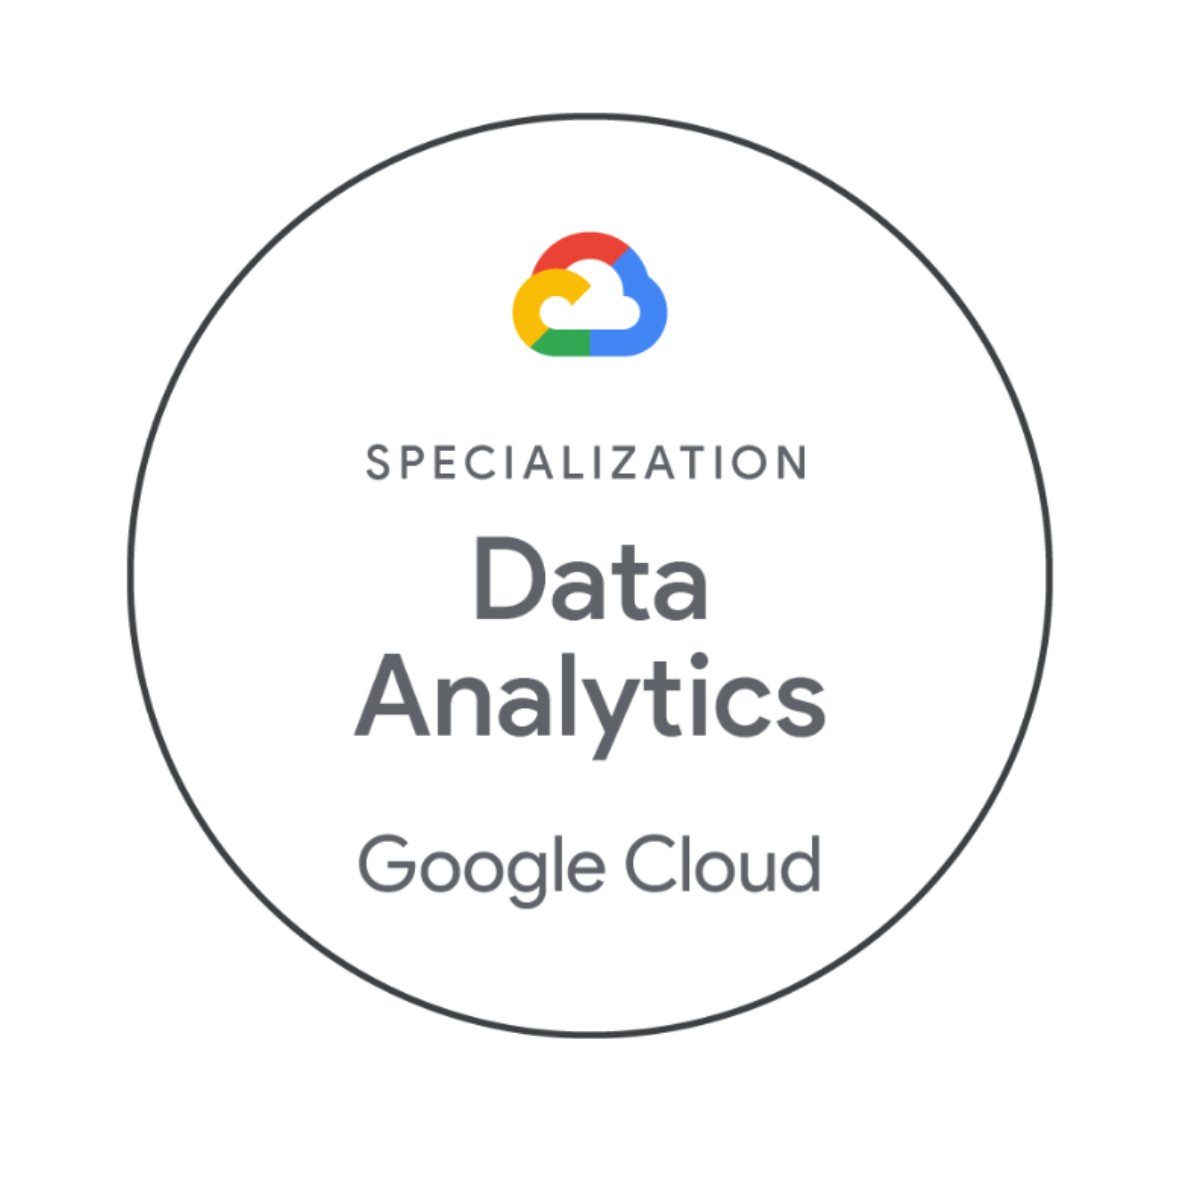 Exciting news! We're now officially specialized in Google Data Analytics Services! 🌟 Let's work together to transform data into valuable insights and help you reach your targets! 💡 #GoogleCloud #DataAnalytics